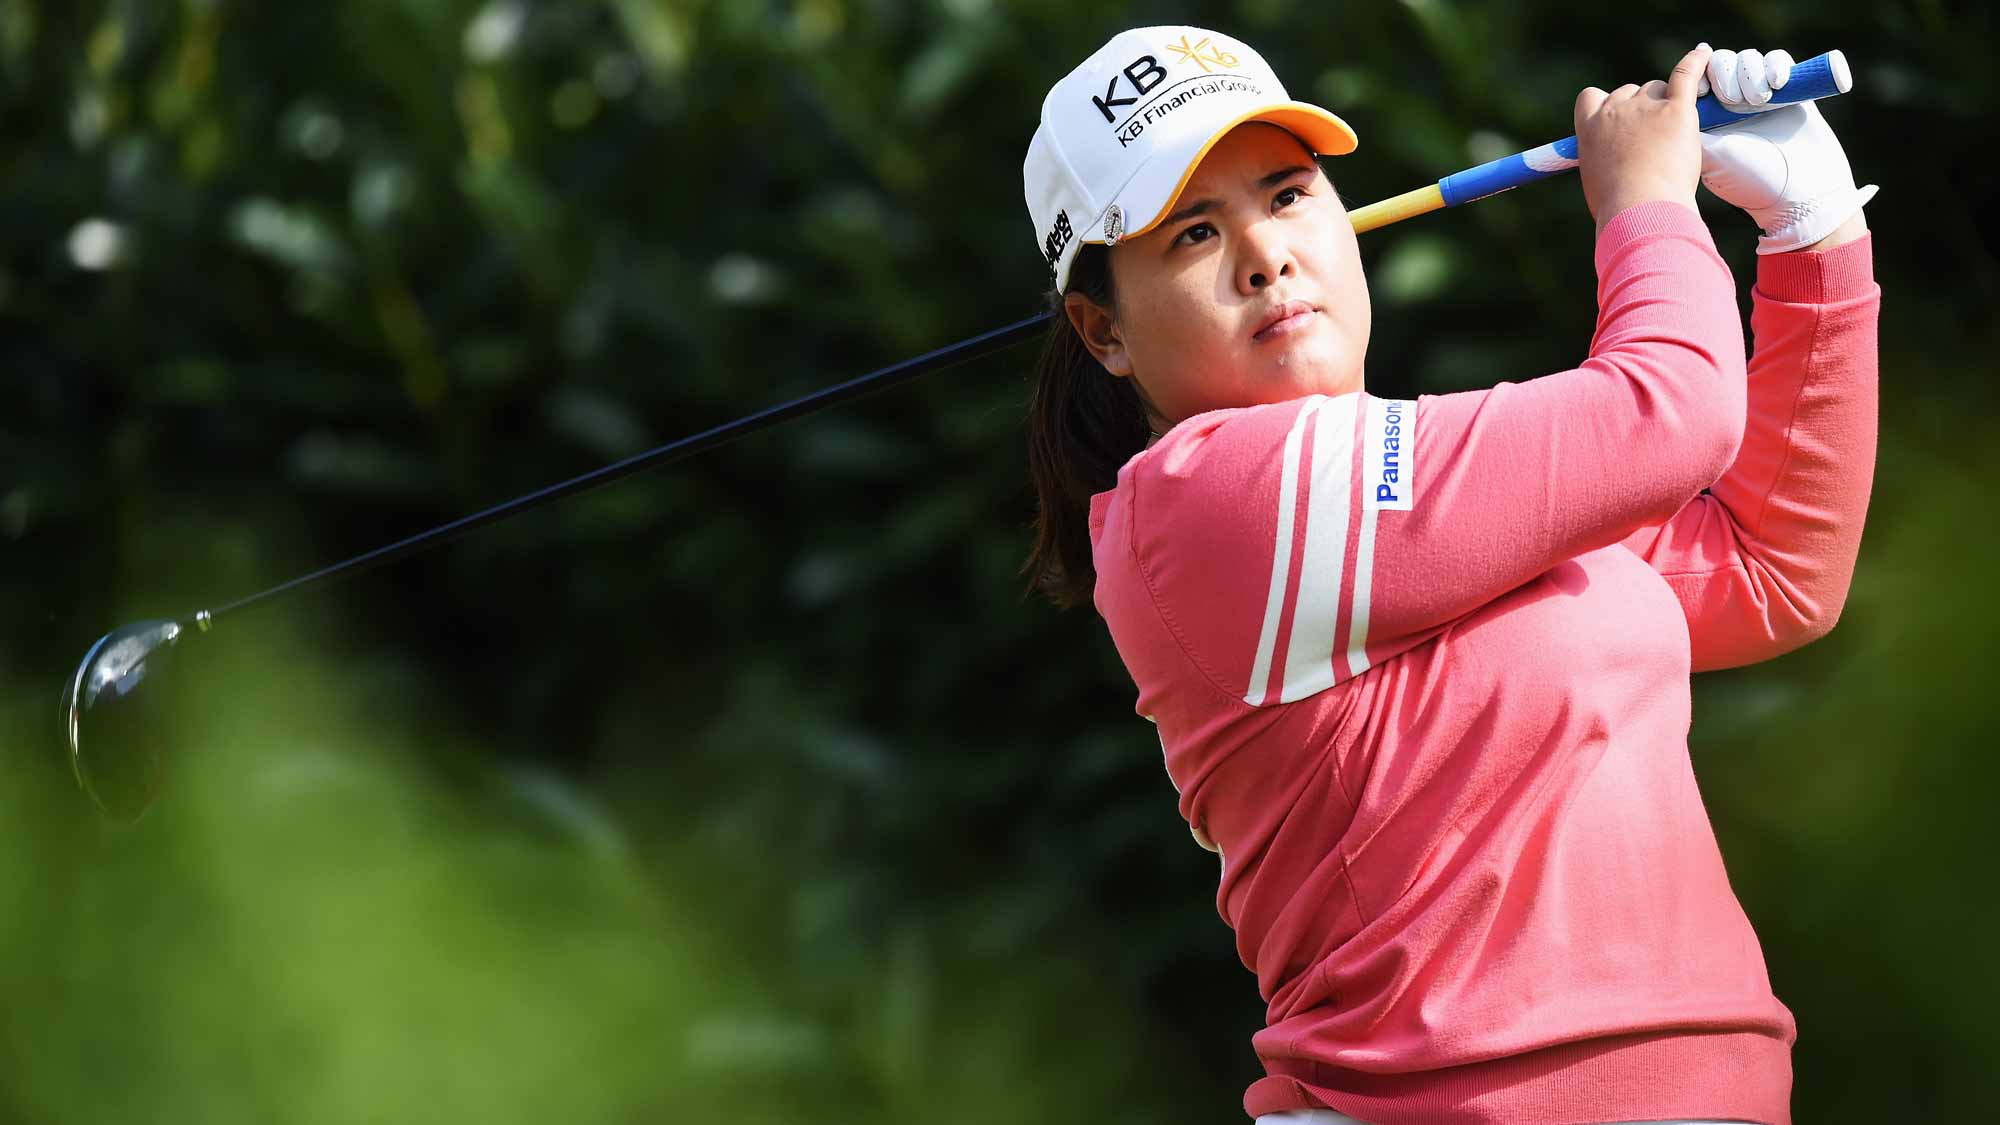 Inbee Park during the second round of the Evian Championship